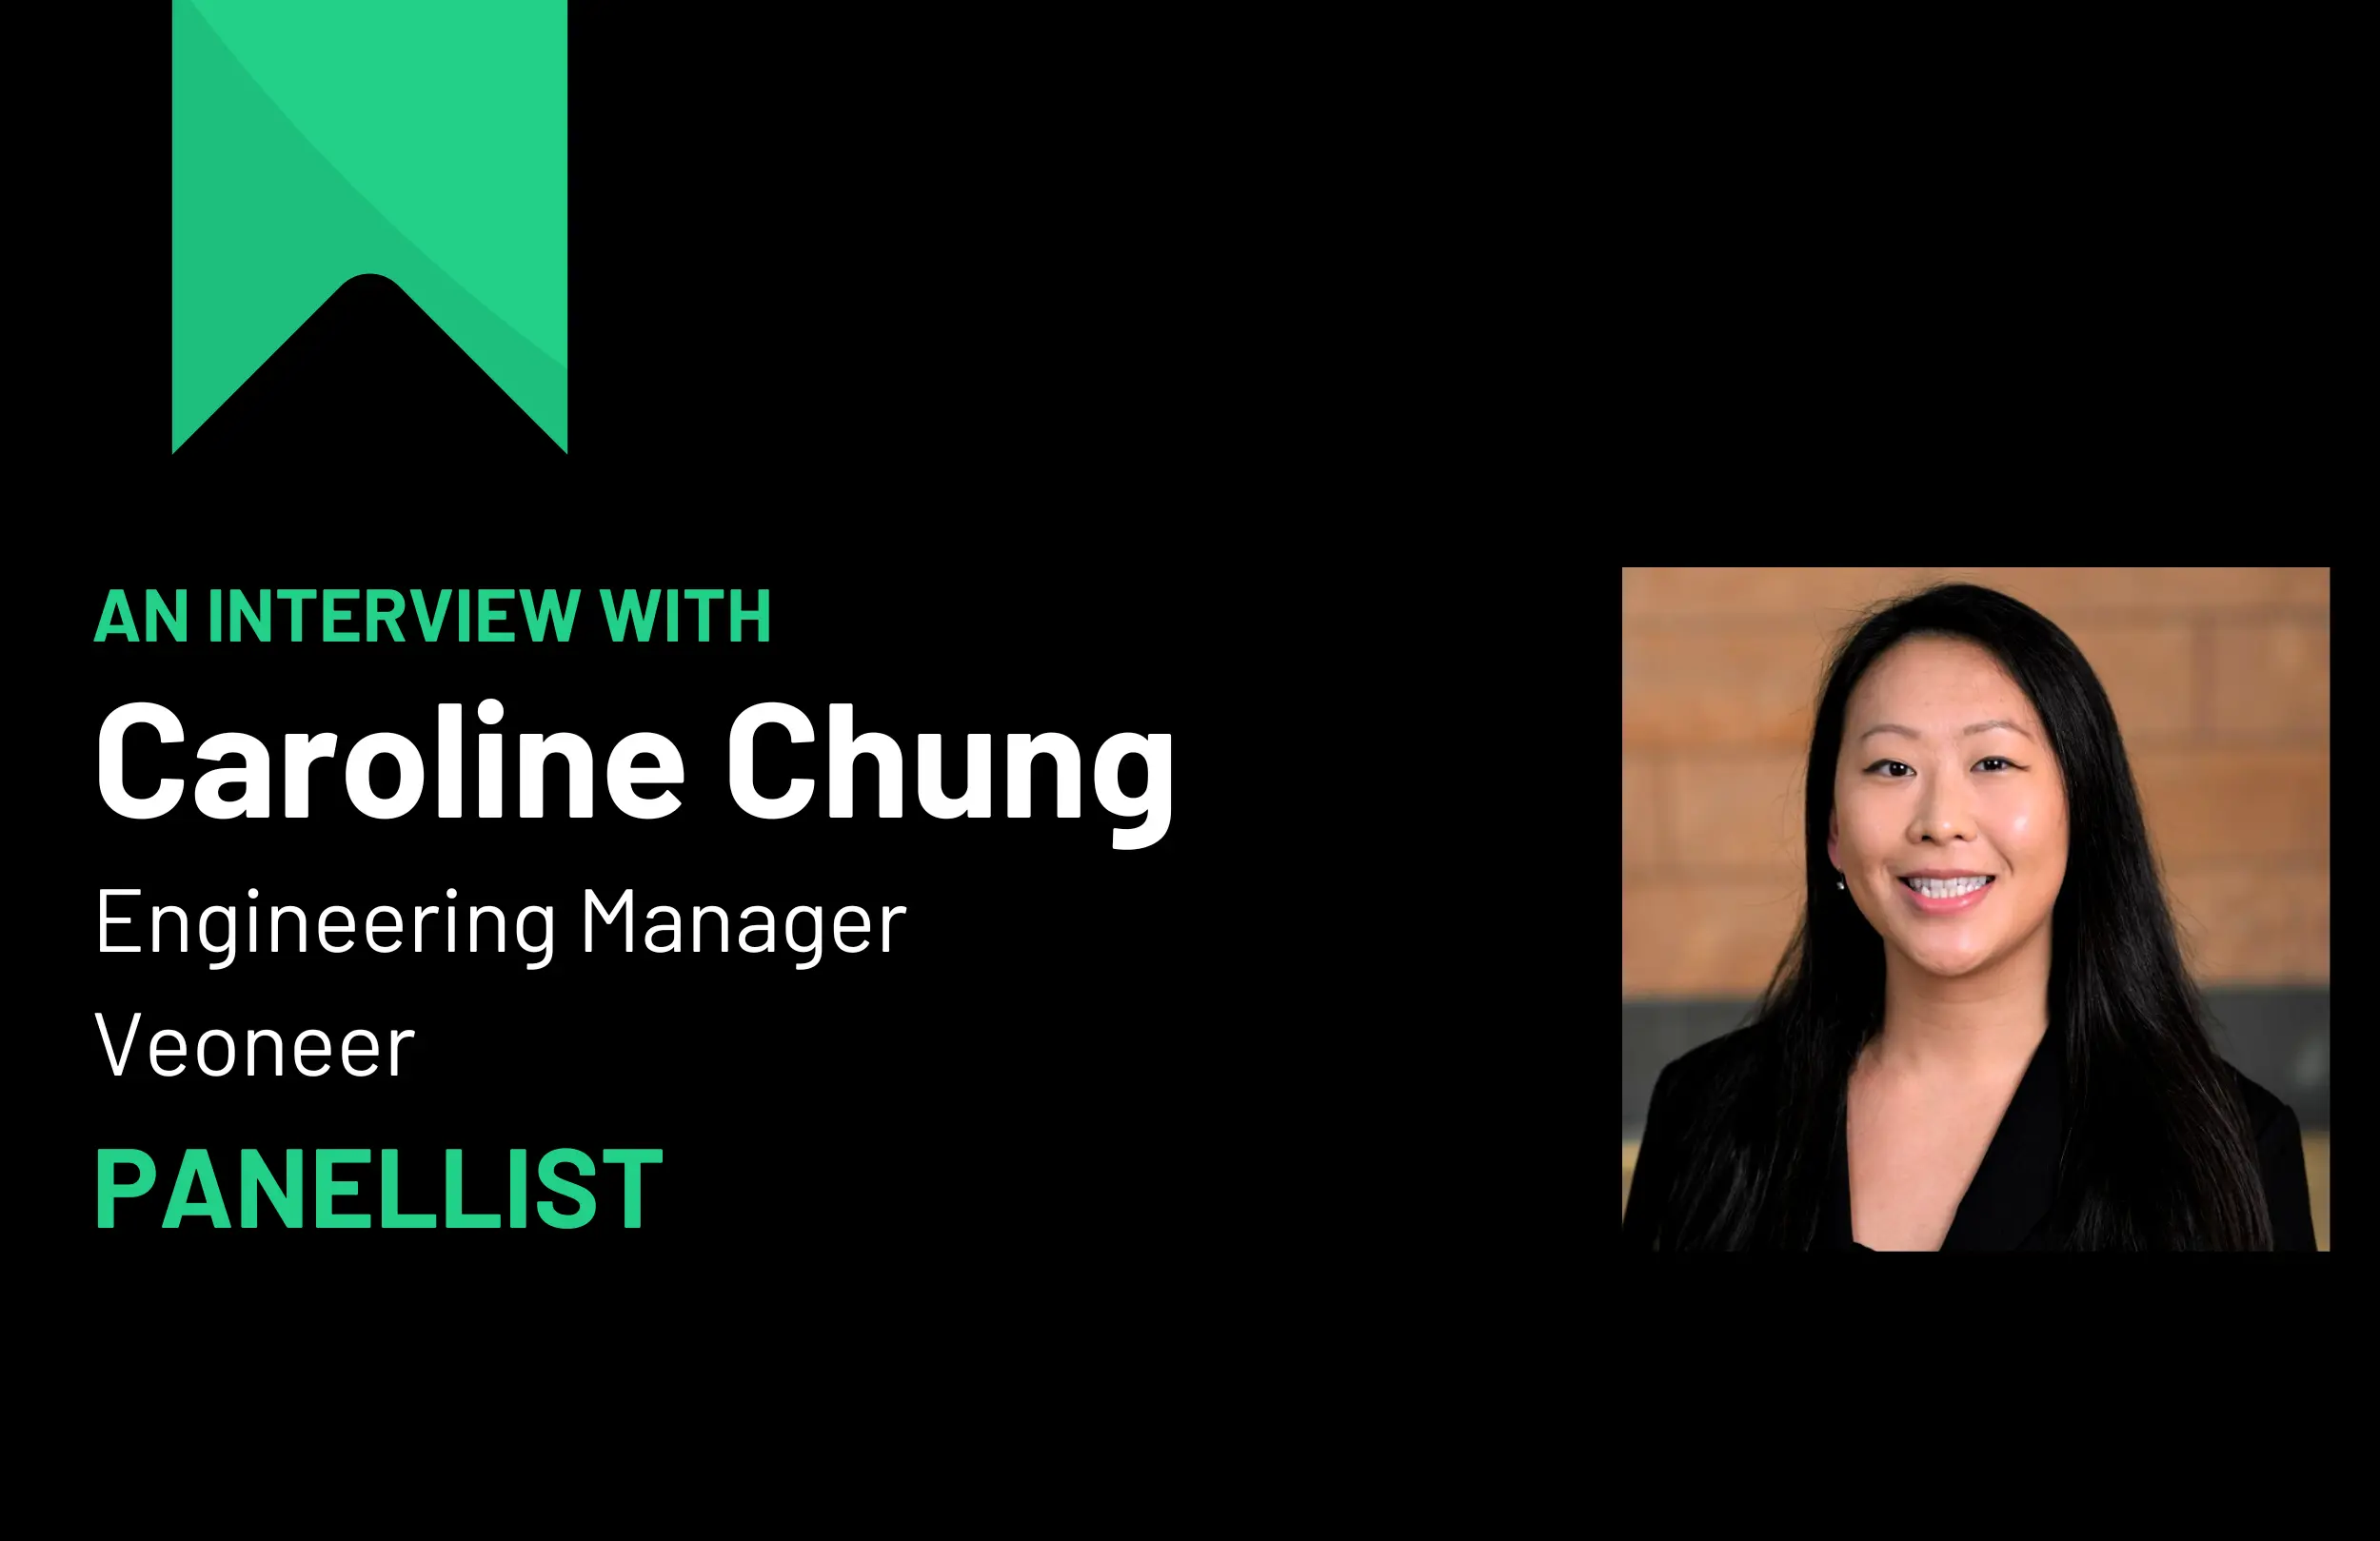 An interview with Caroline Chung, Engineering Manager at Veoneer